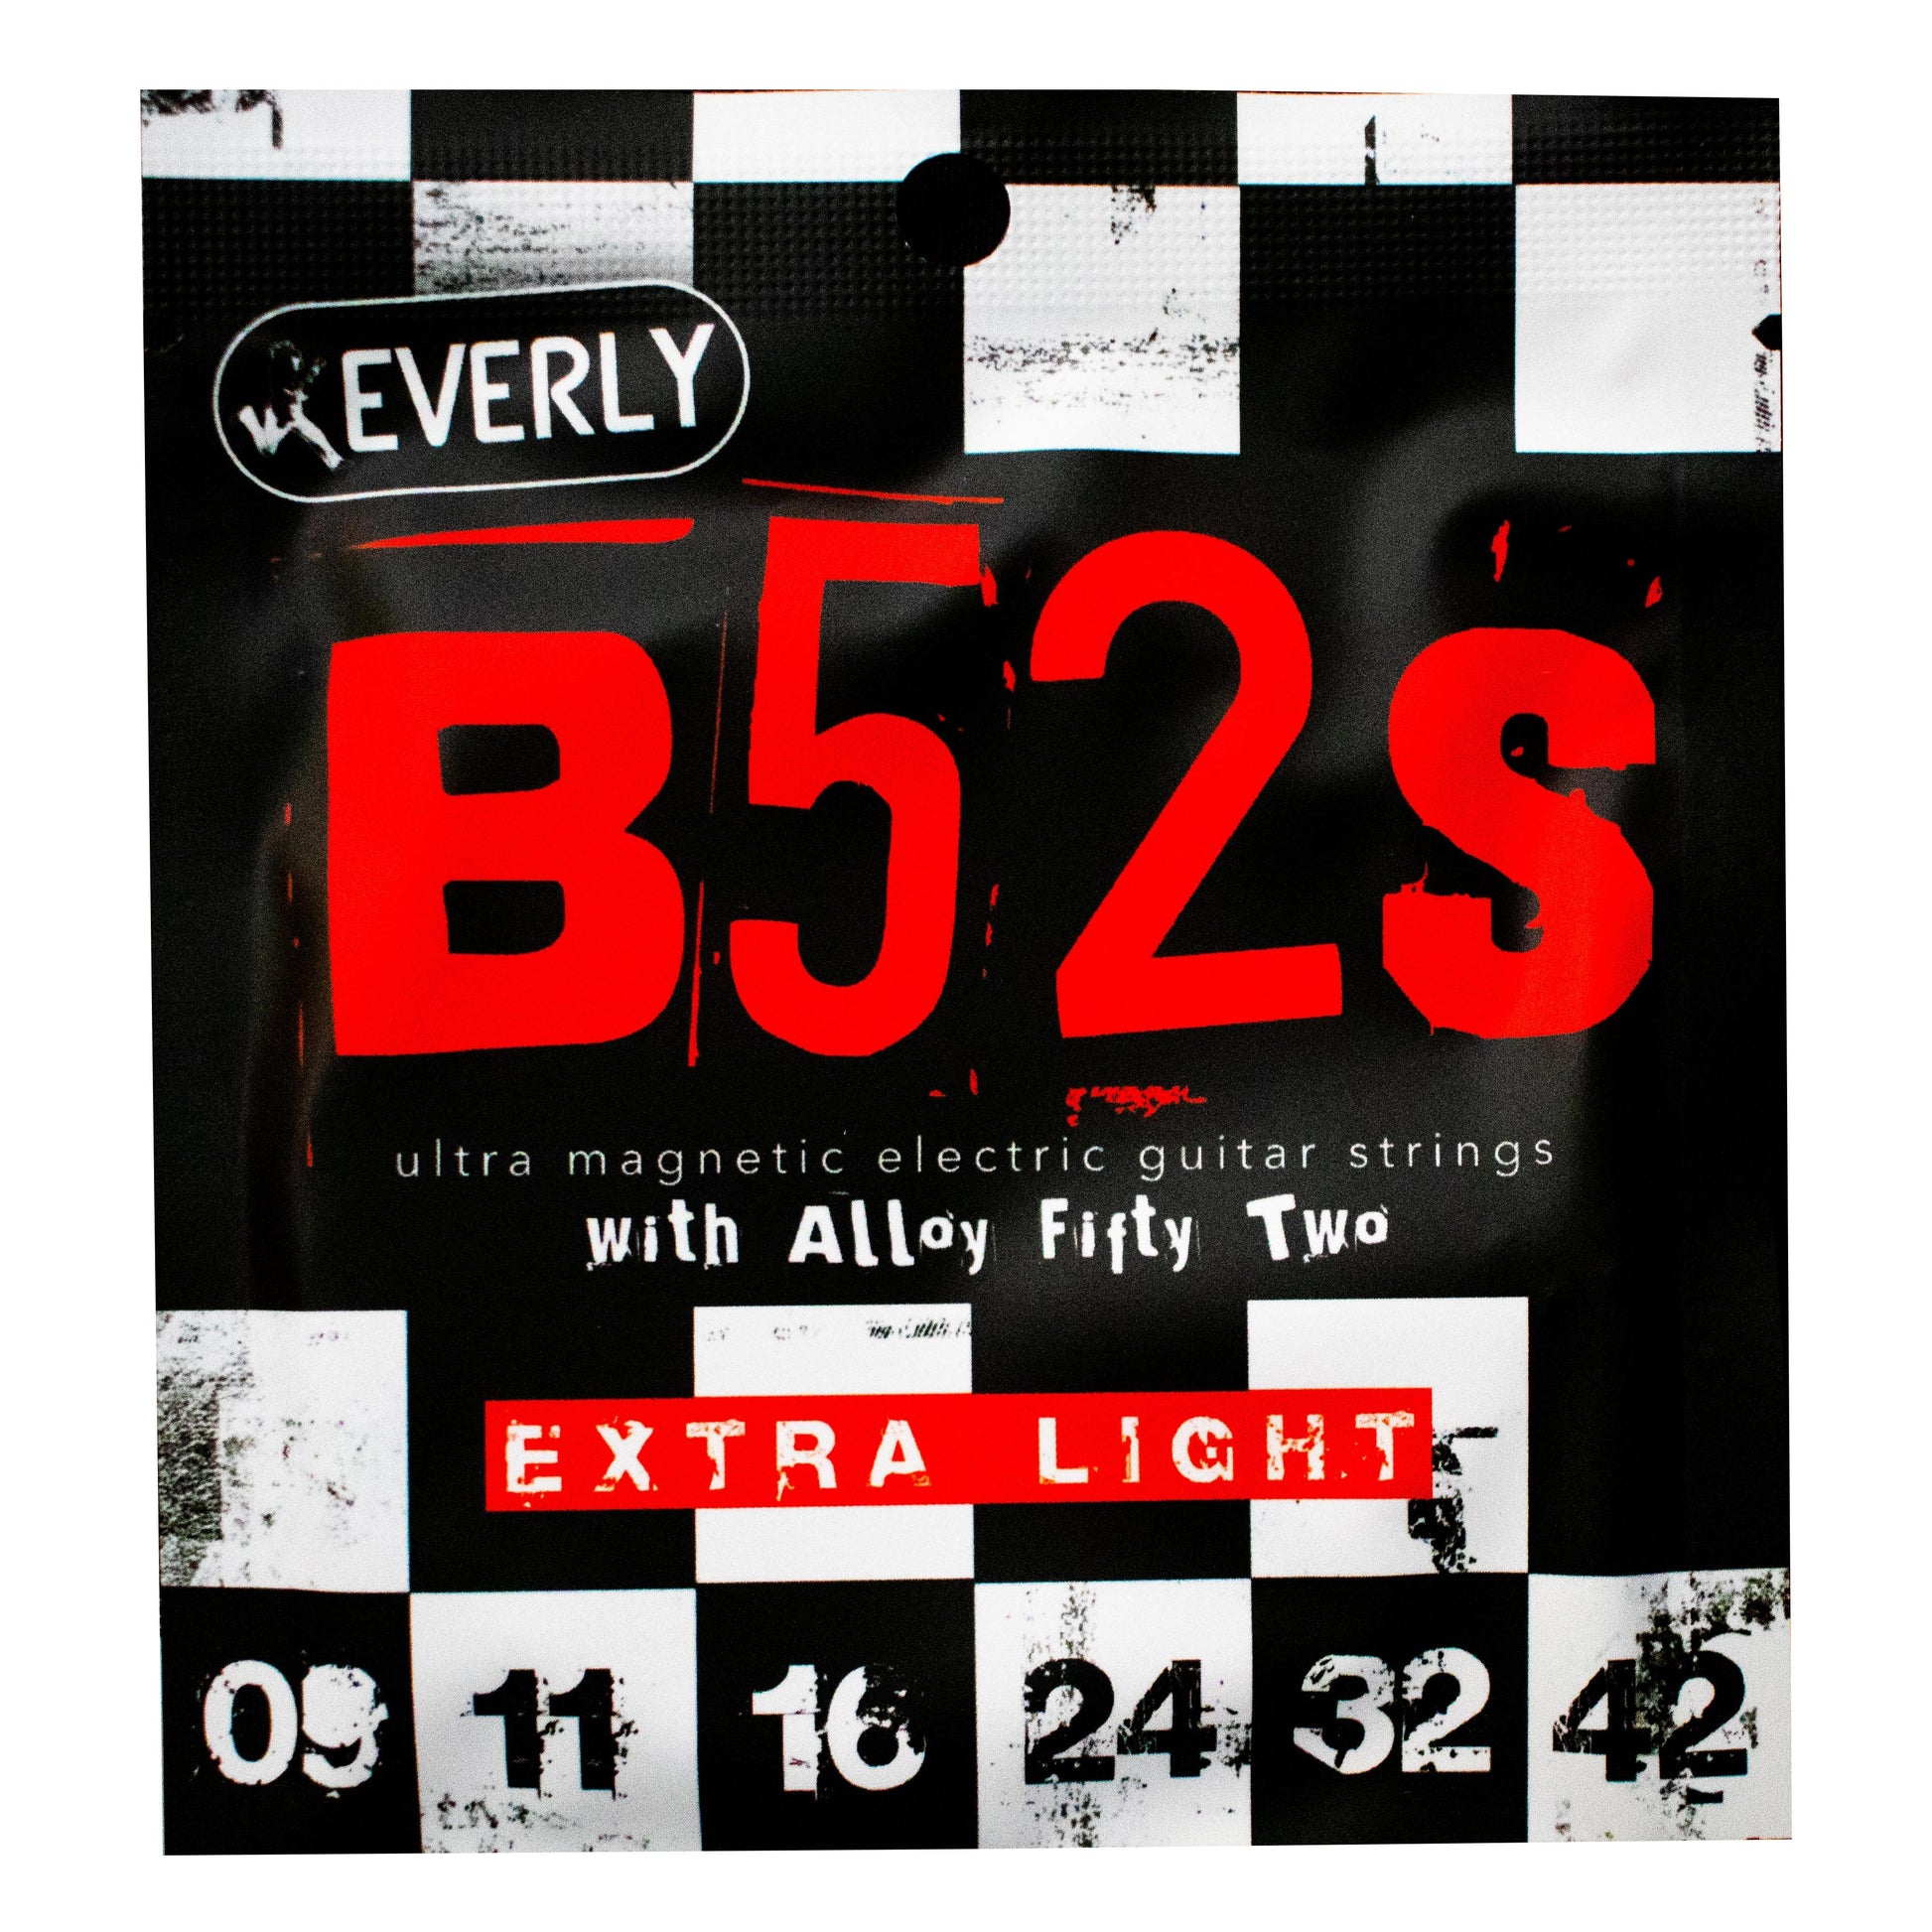 Everly B52's - Cleartone Strings